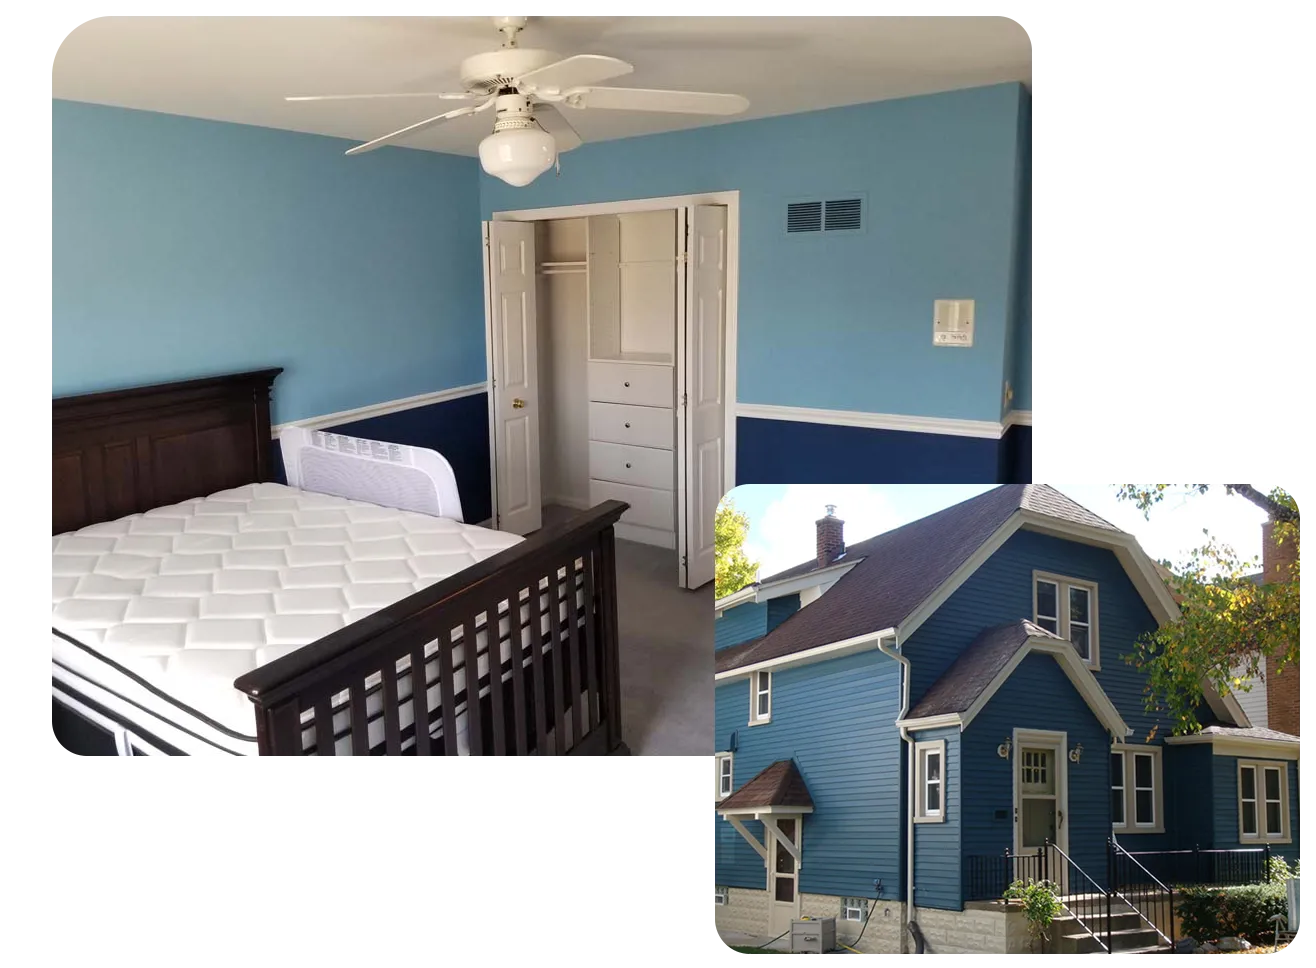 Interior and Exterior of a home painted blue